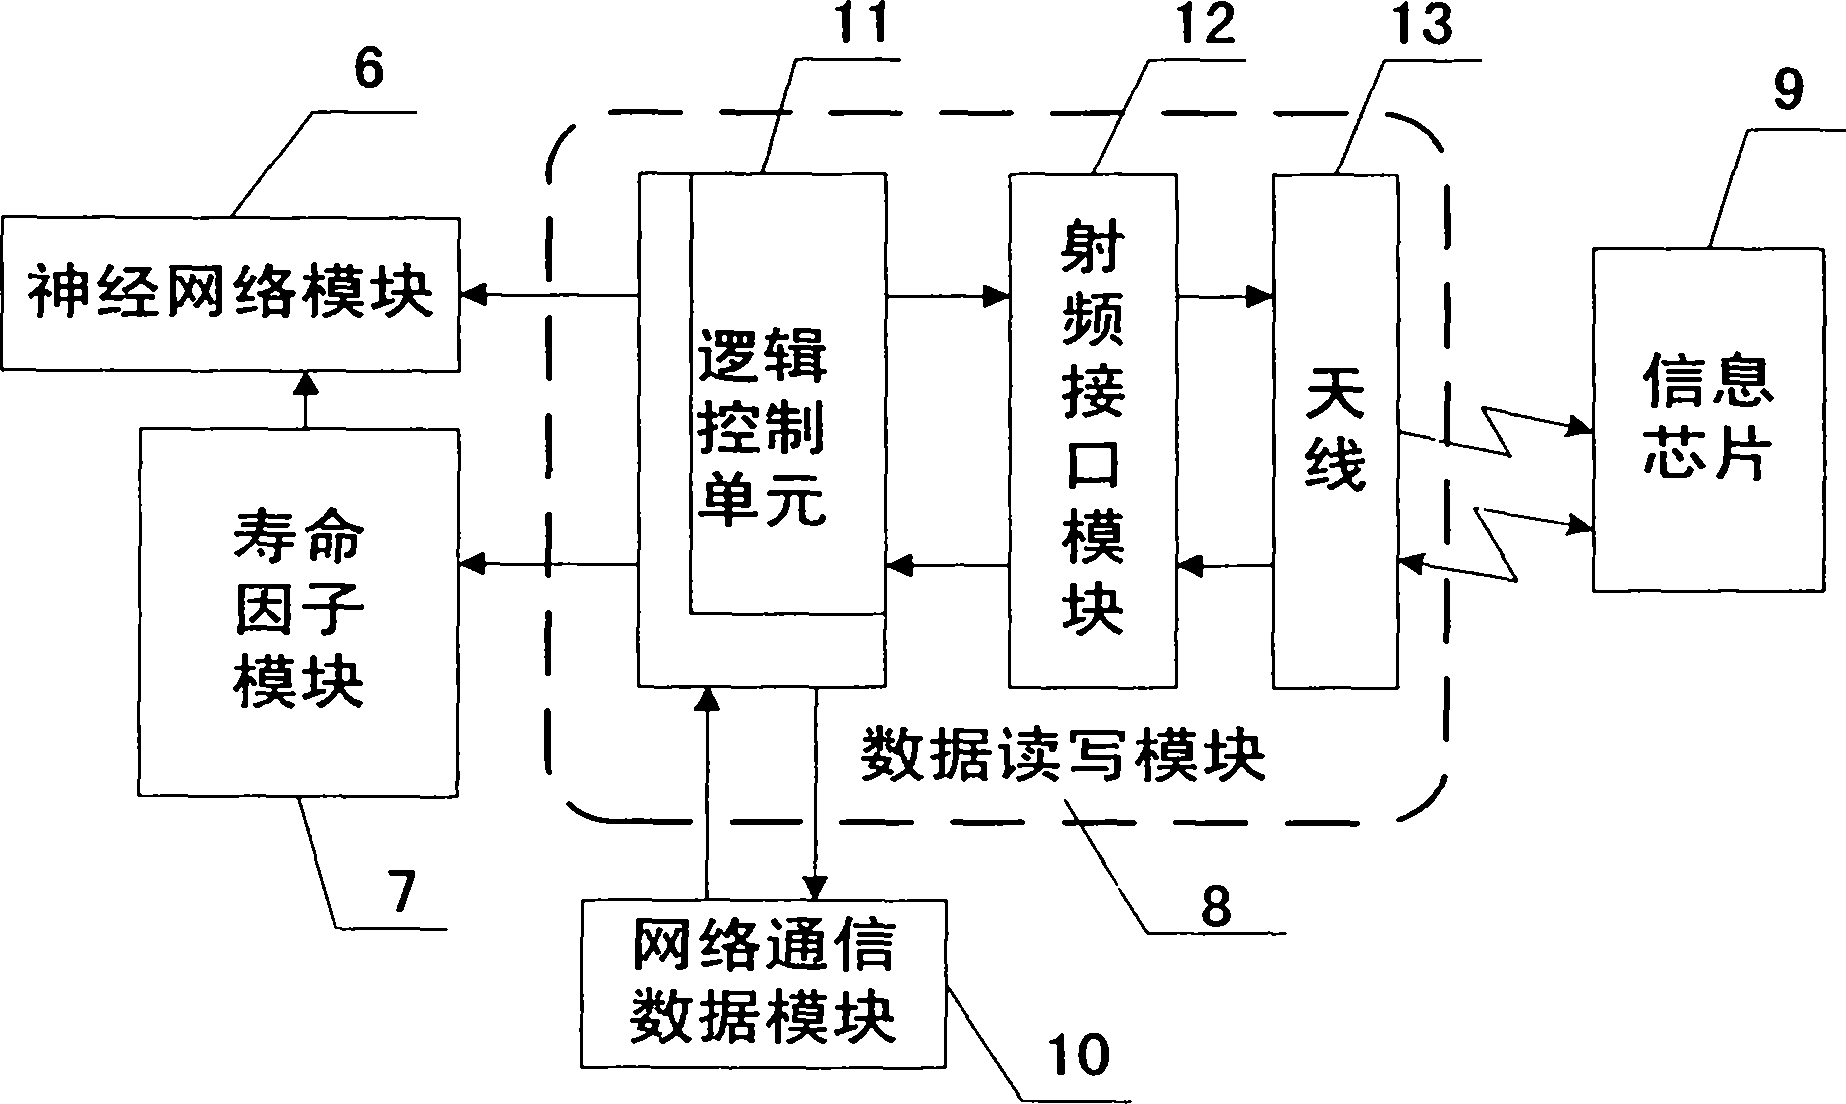 Evaluation method for system on chip (SOC) of charging station battery